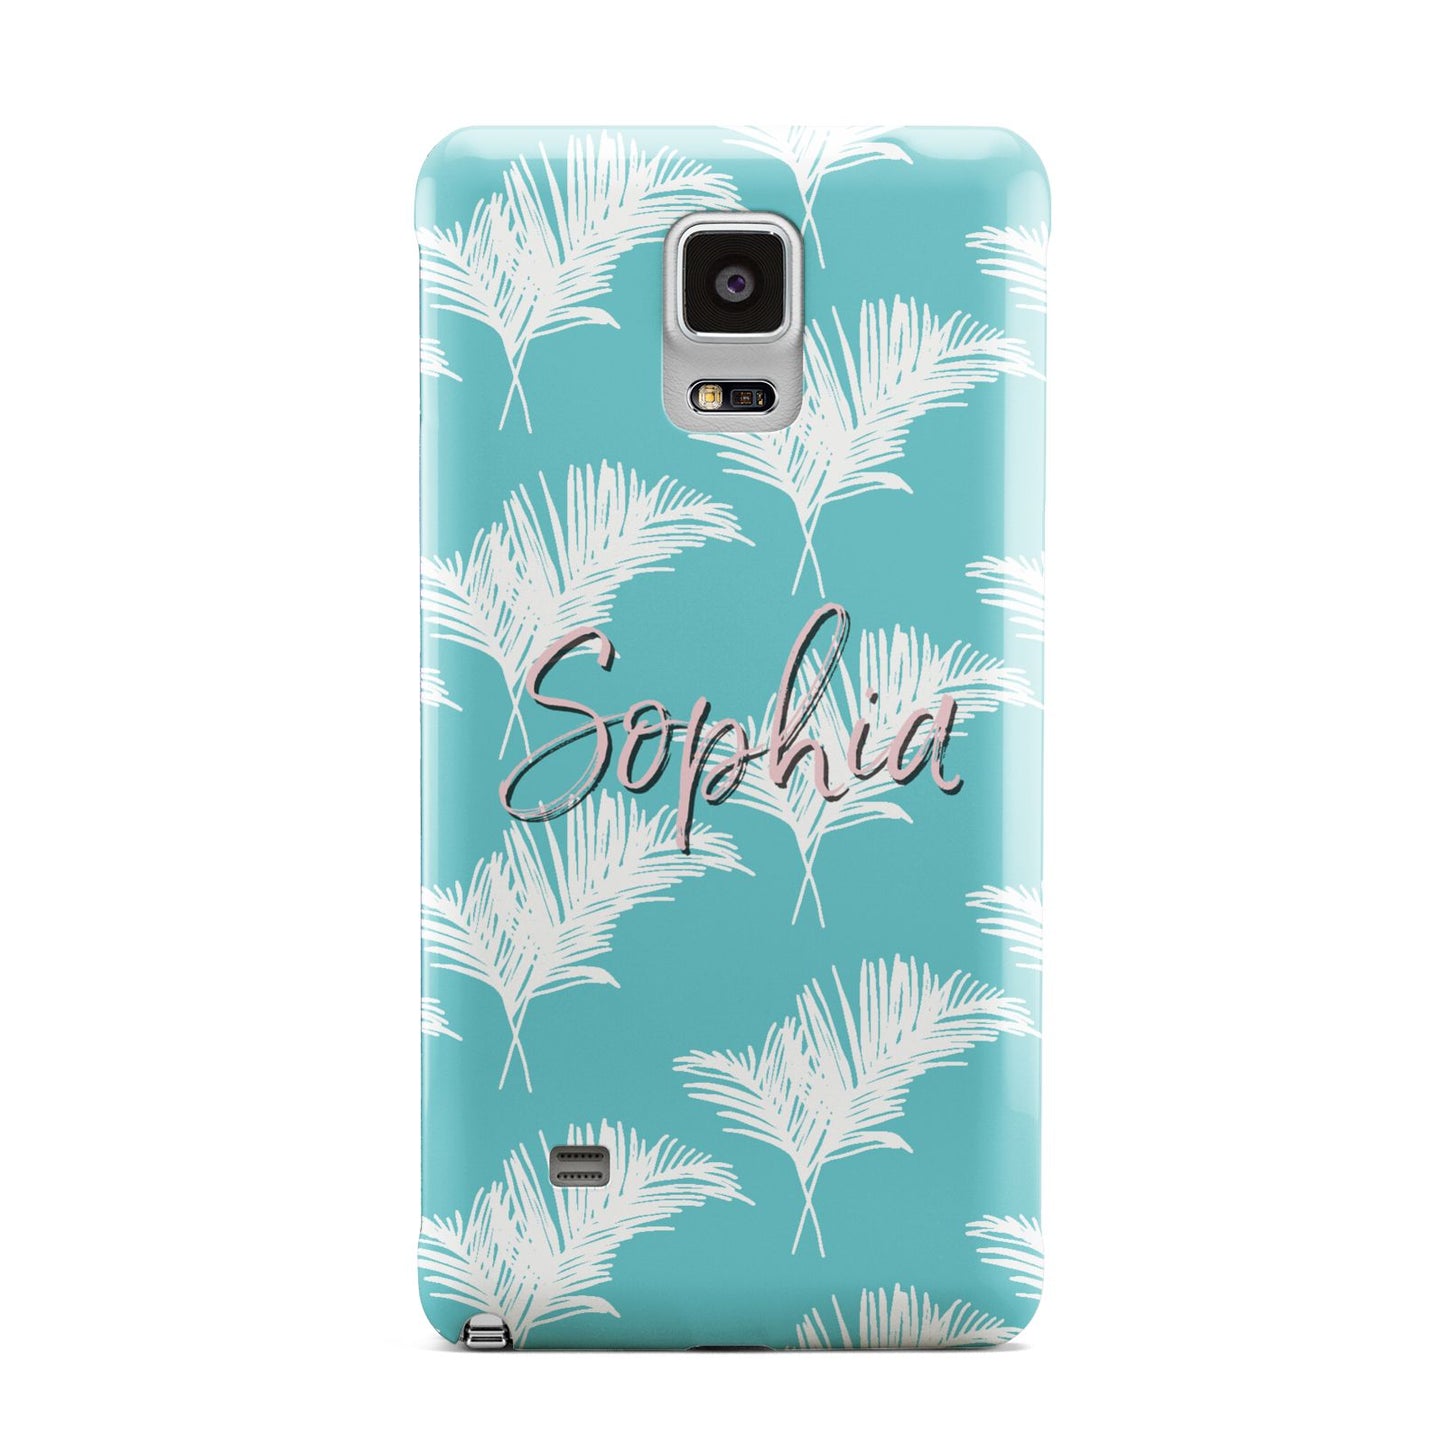 Personalised Blue White Tropical Foliage Samsung Galaxy Note 4 Case